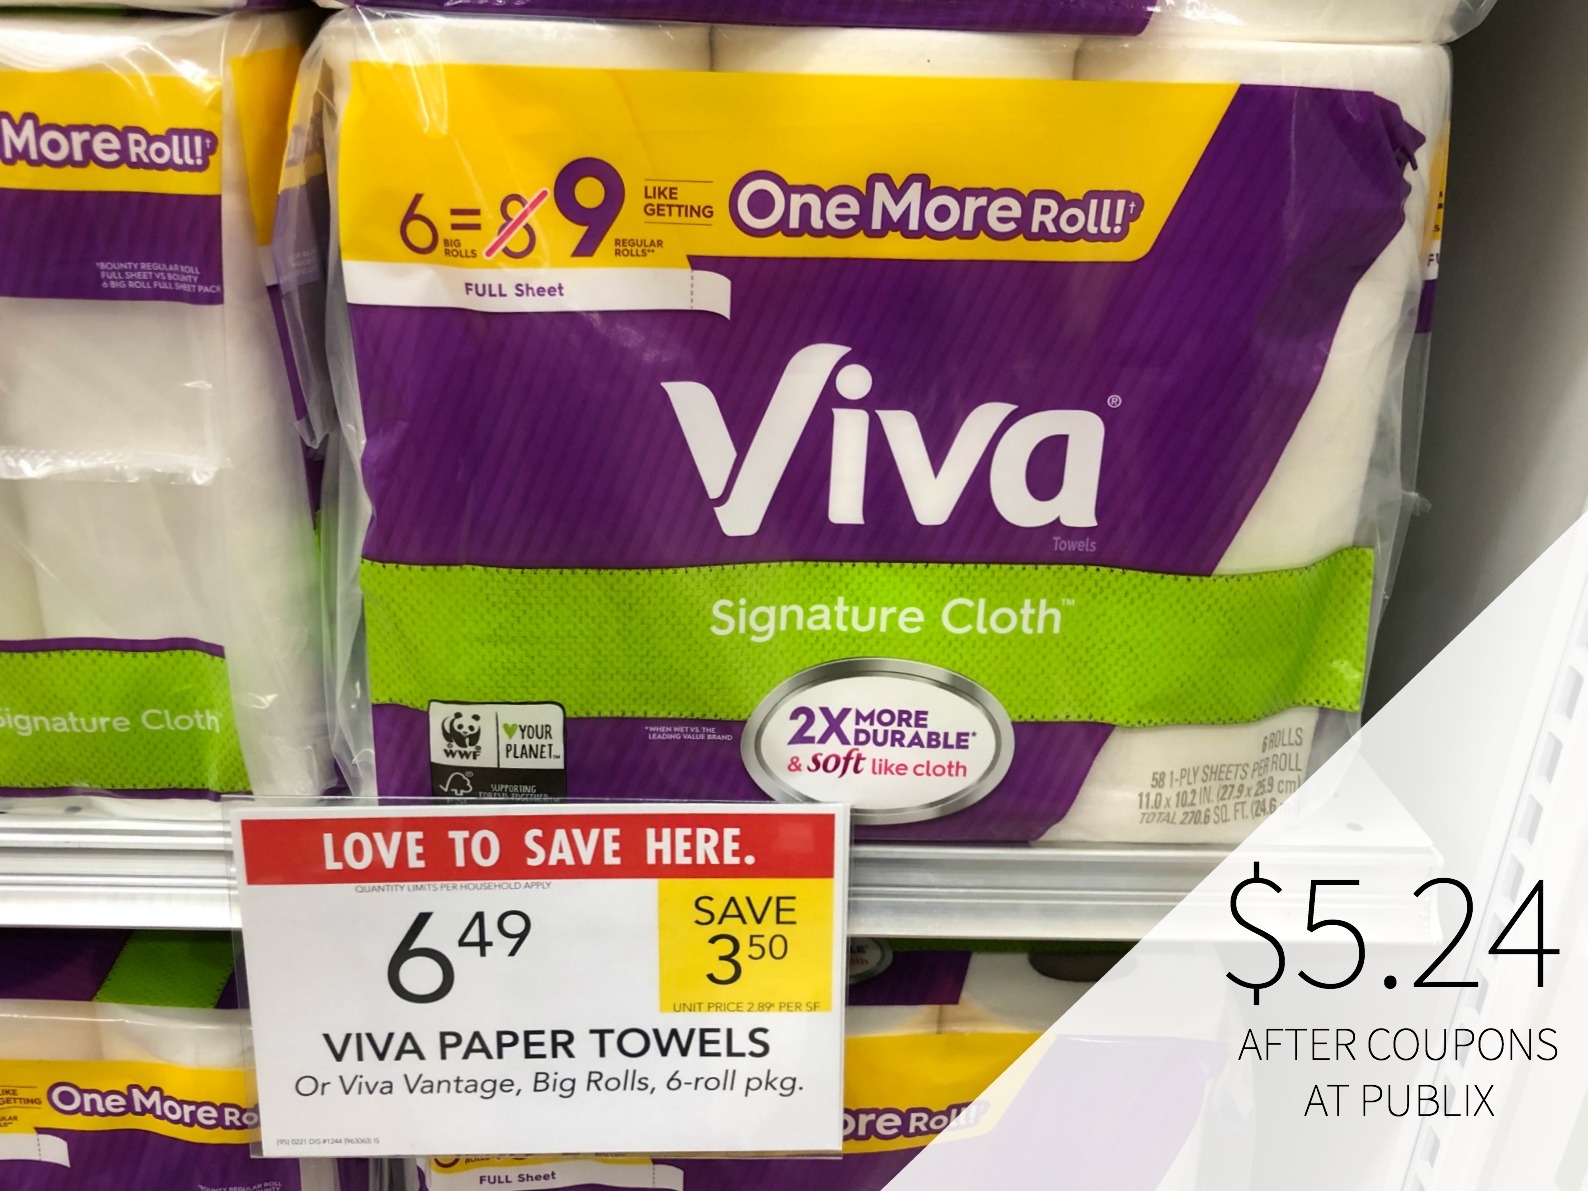 Can't-Miss Deals On Cottonelle Toilet Paper And Viva Paper Towels This Week At Publix on I Heart Publix